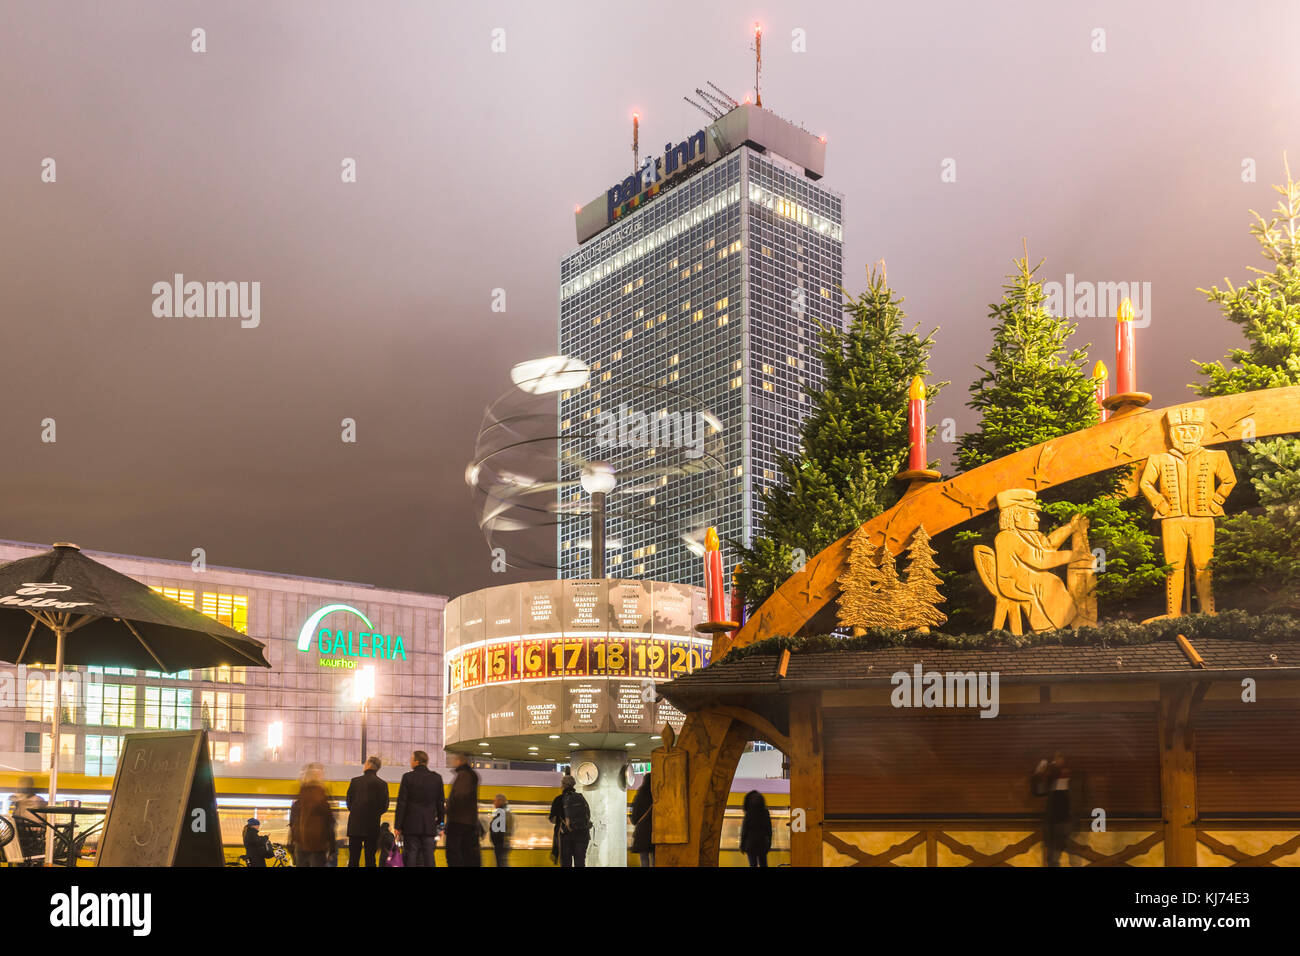 View over Alexanderplatz in Berlin at night with the World time clock (Weltzeituhr) and the Park Inn Hotel and the Kaufhaus Galeria, Berlin, Germany Stock Photo